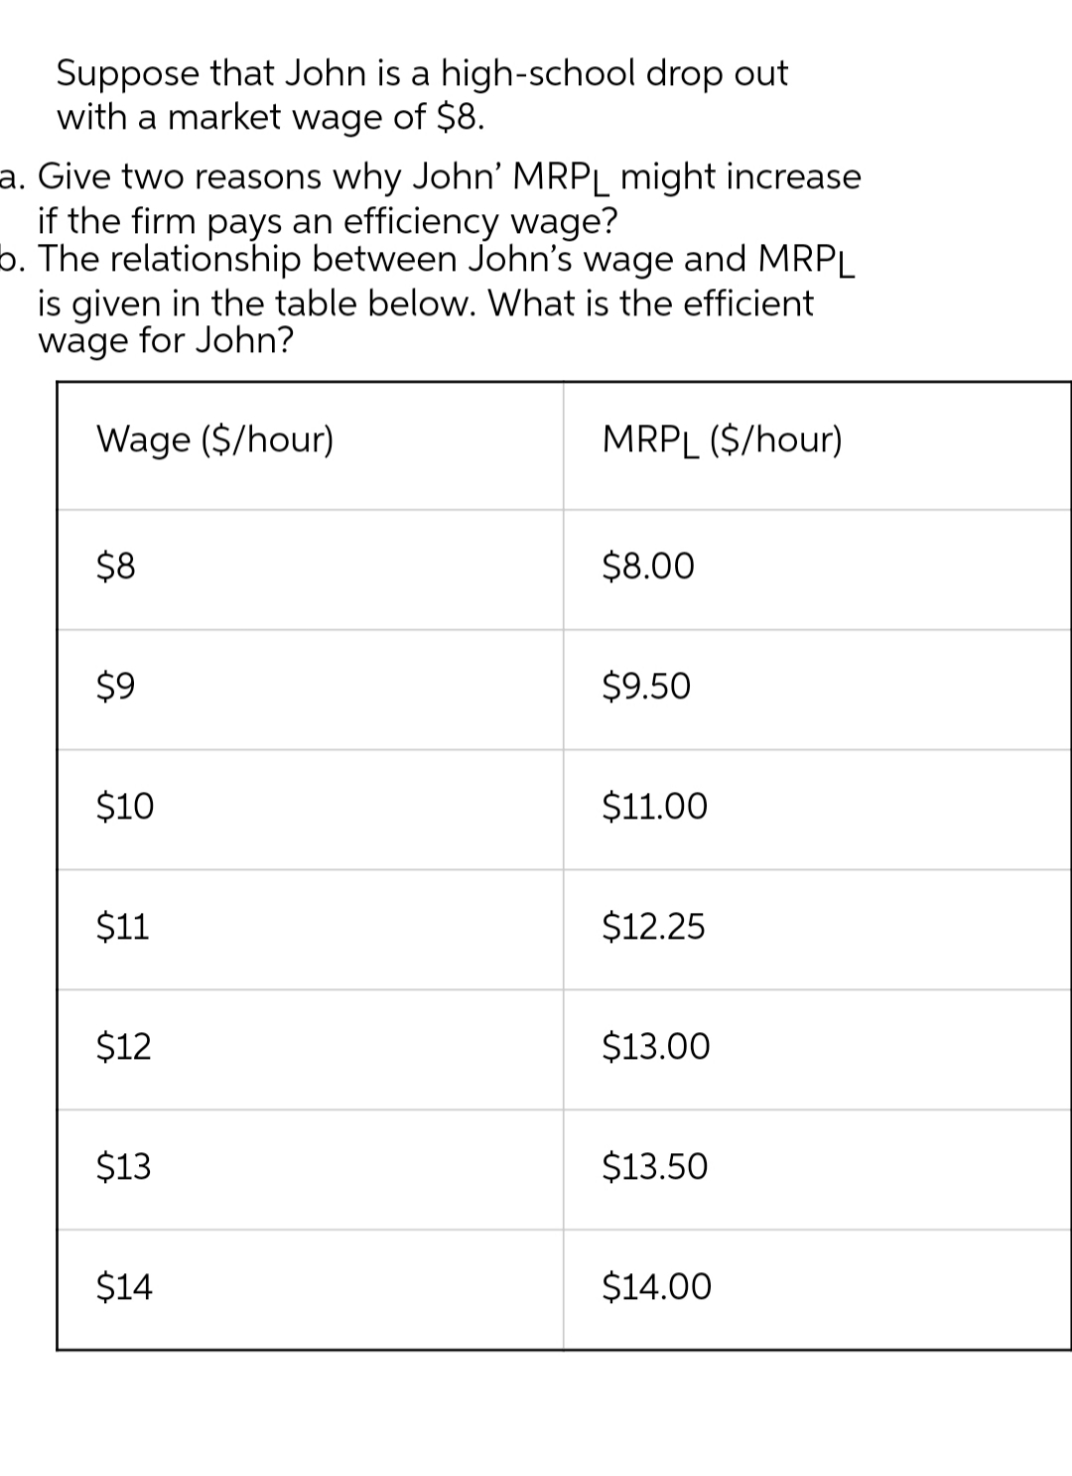 Suppose that John is a high-school drop out
with a market wage of $8.
a. Give two reasons why John' MRPL might increase
if the firm pays an efficiency wage?
b. The relationship between John's wage and MRPL
is given in the table below. What is the efficient
wage for John?
Wage ($/hour)
MRPL ($/hour)
$8
$8.00
$9
$9.50
$10
$11.00
$11
$12.25
$12
$13.00
$13
$13.50
$14
$14.00
